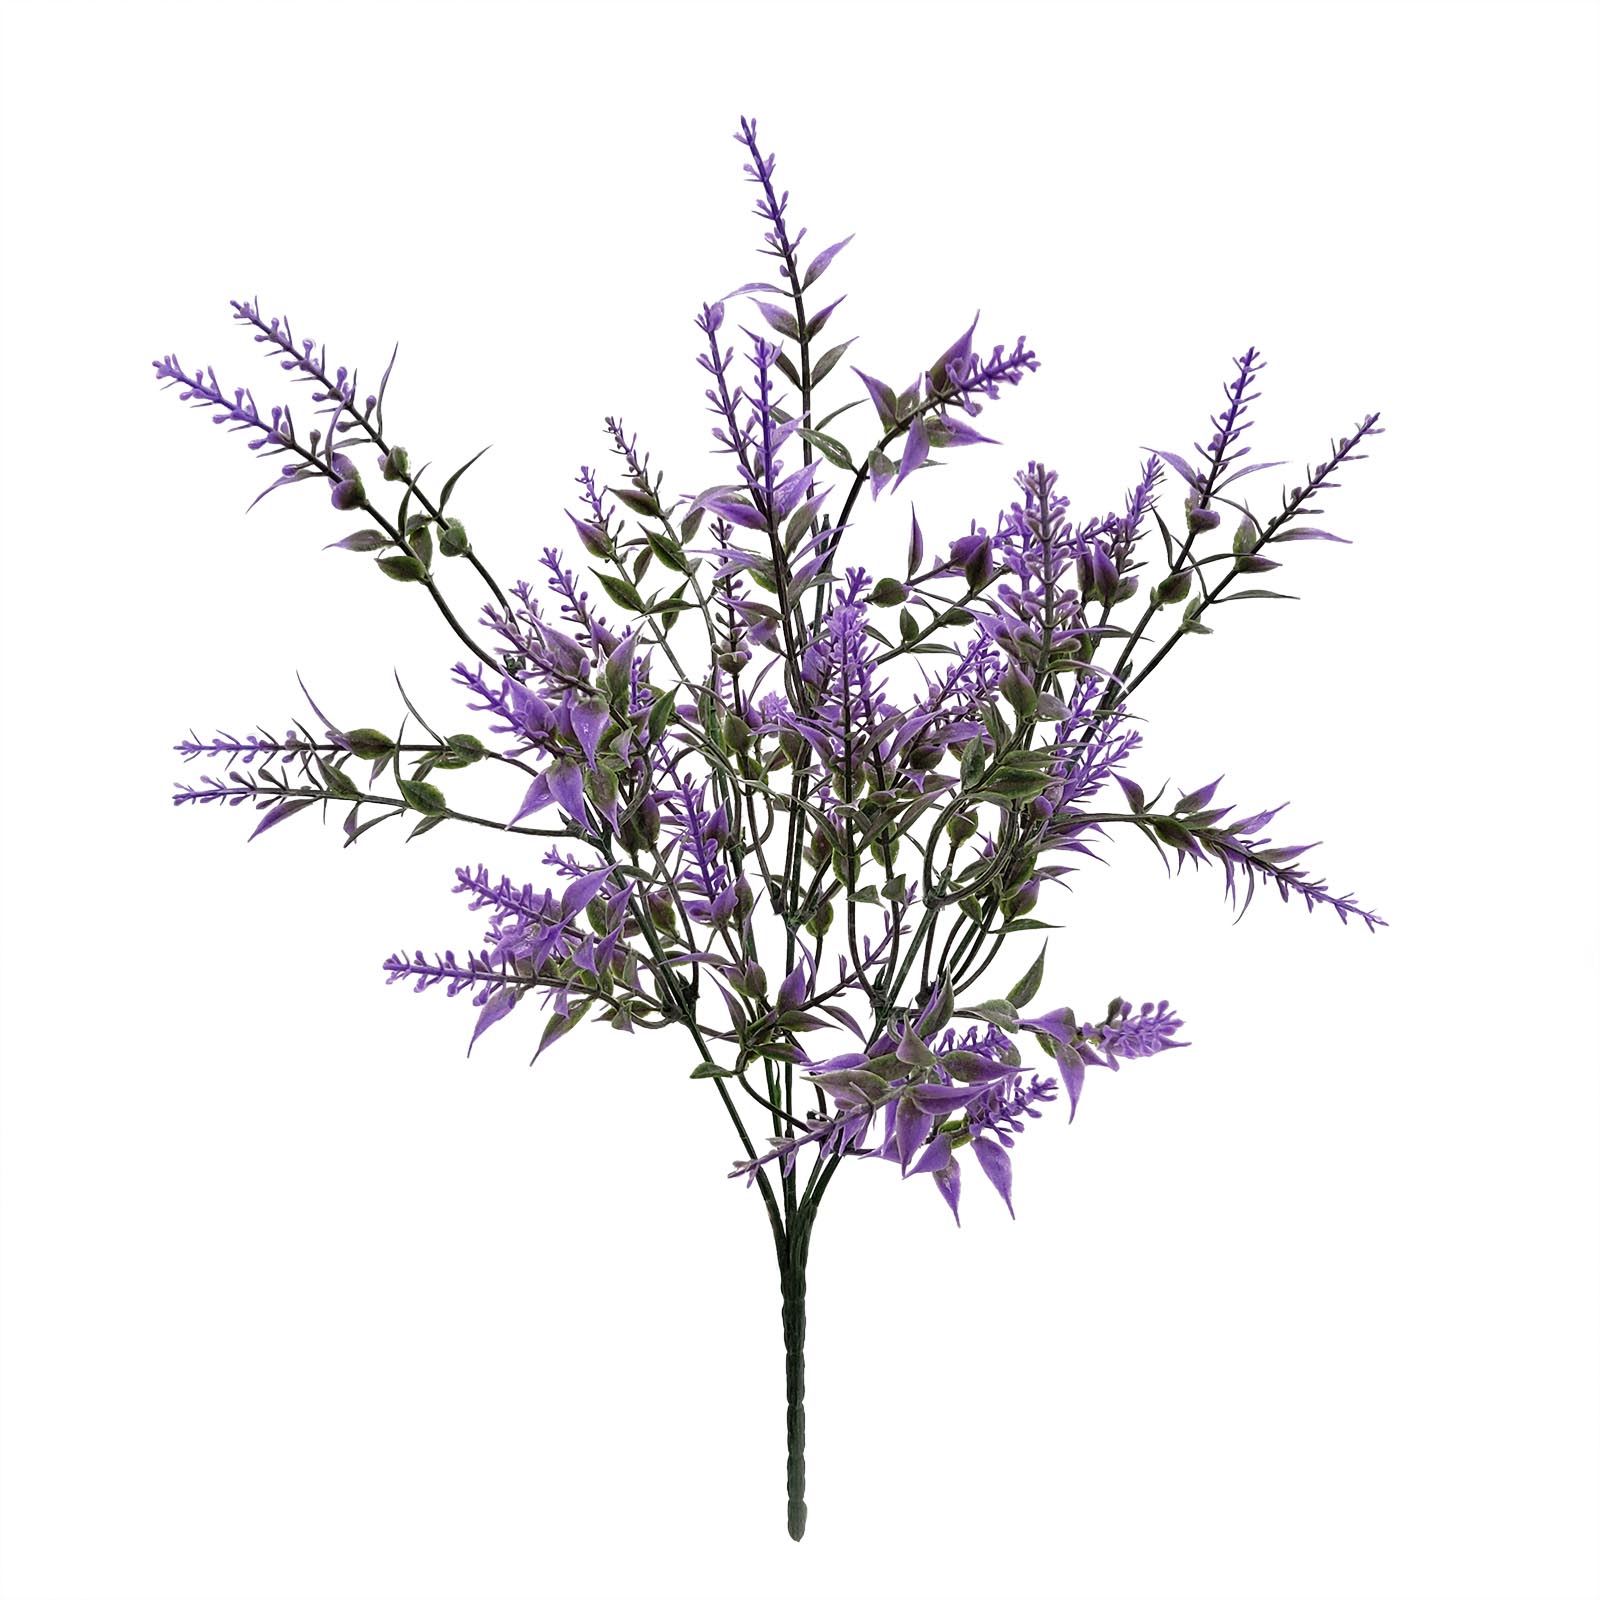 Mainstays Indoor Artificial Flower Lavender Pick, Purple Color, Assembled Height 13.5" - image 1 of 5